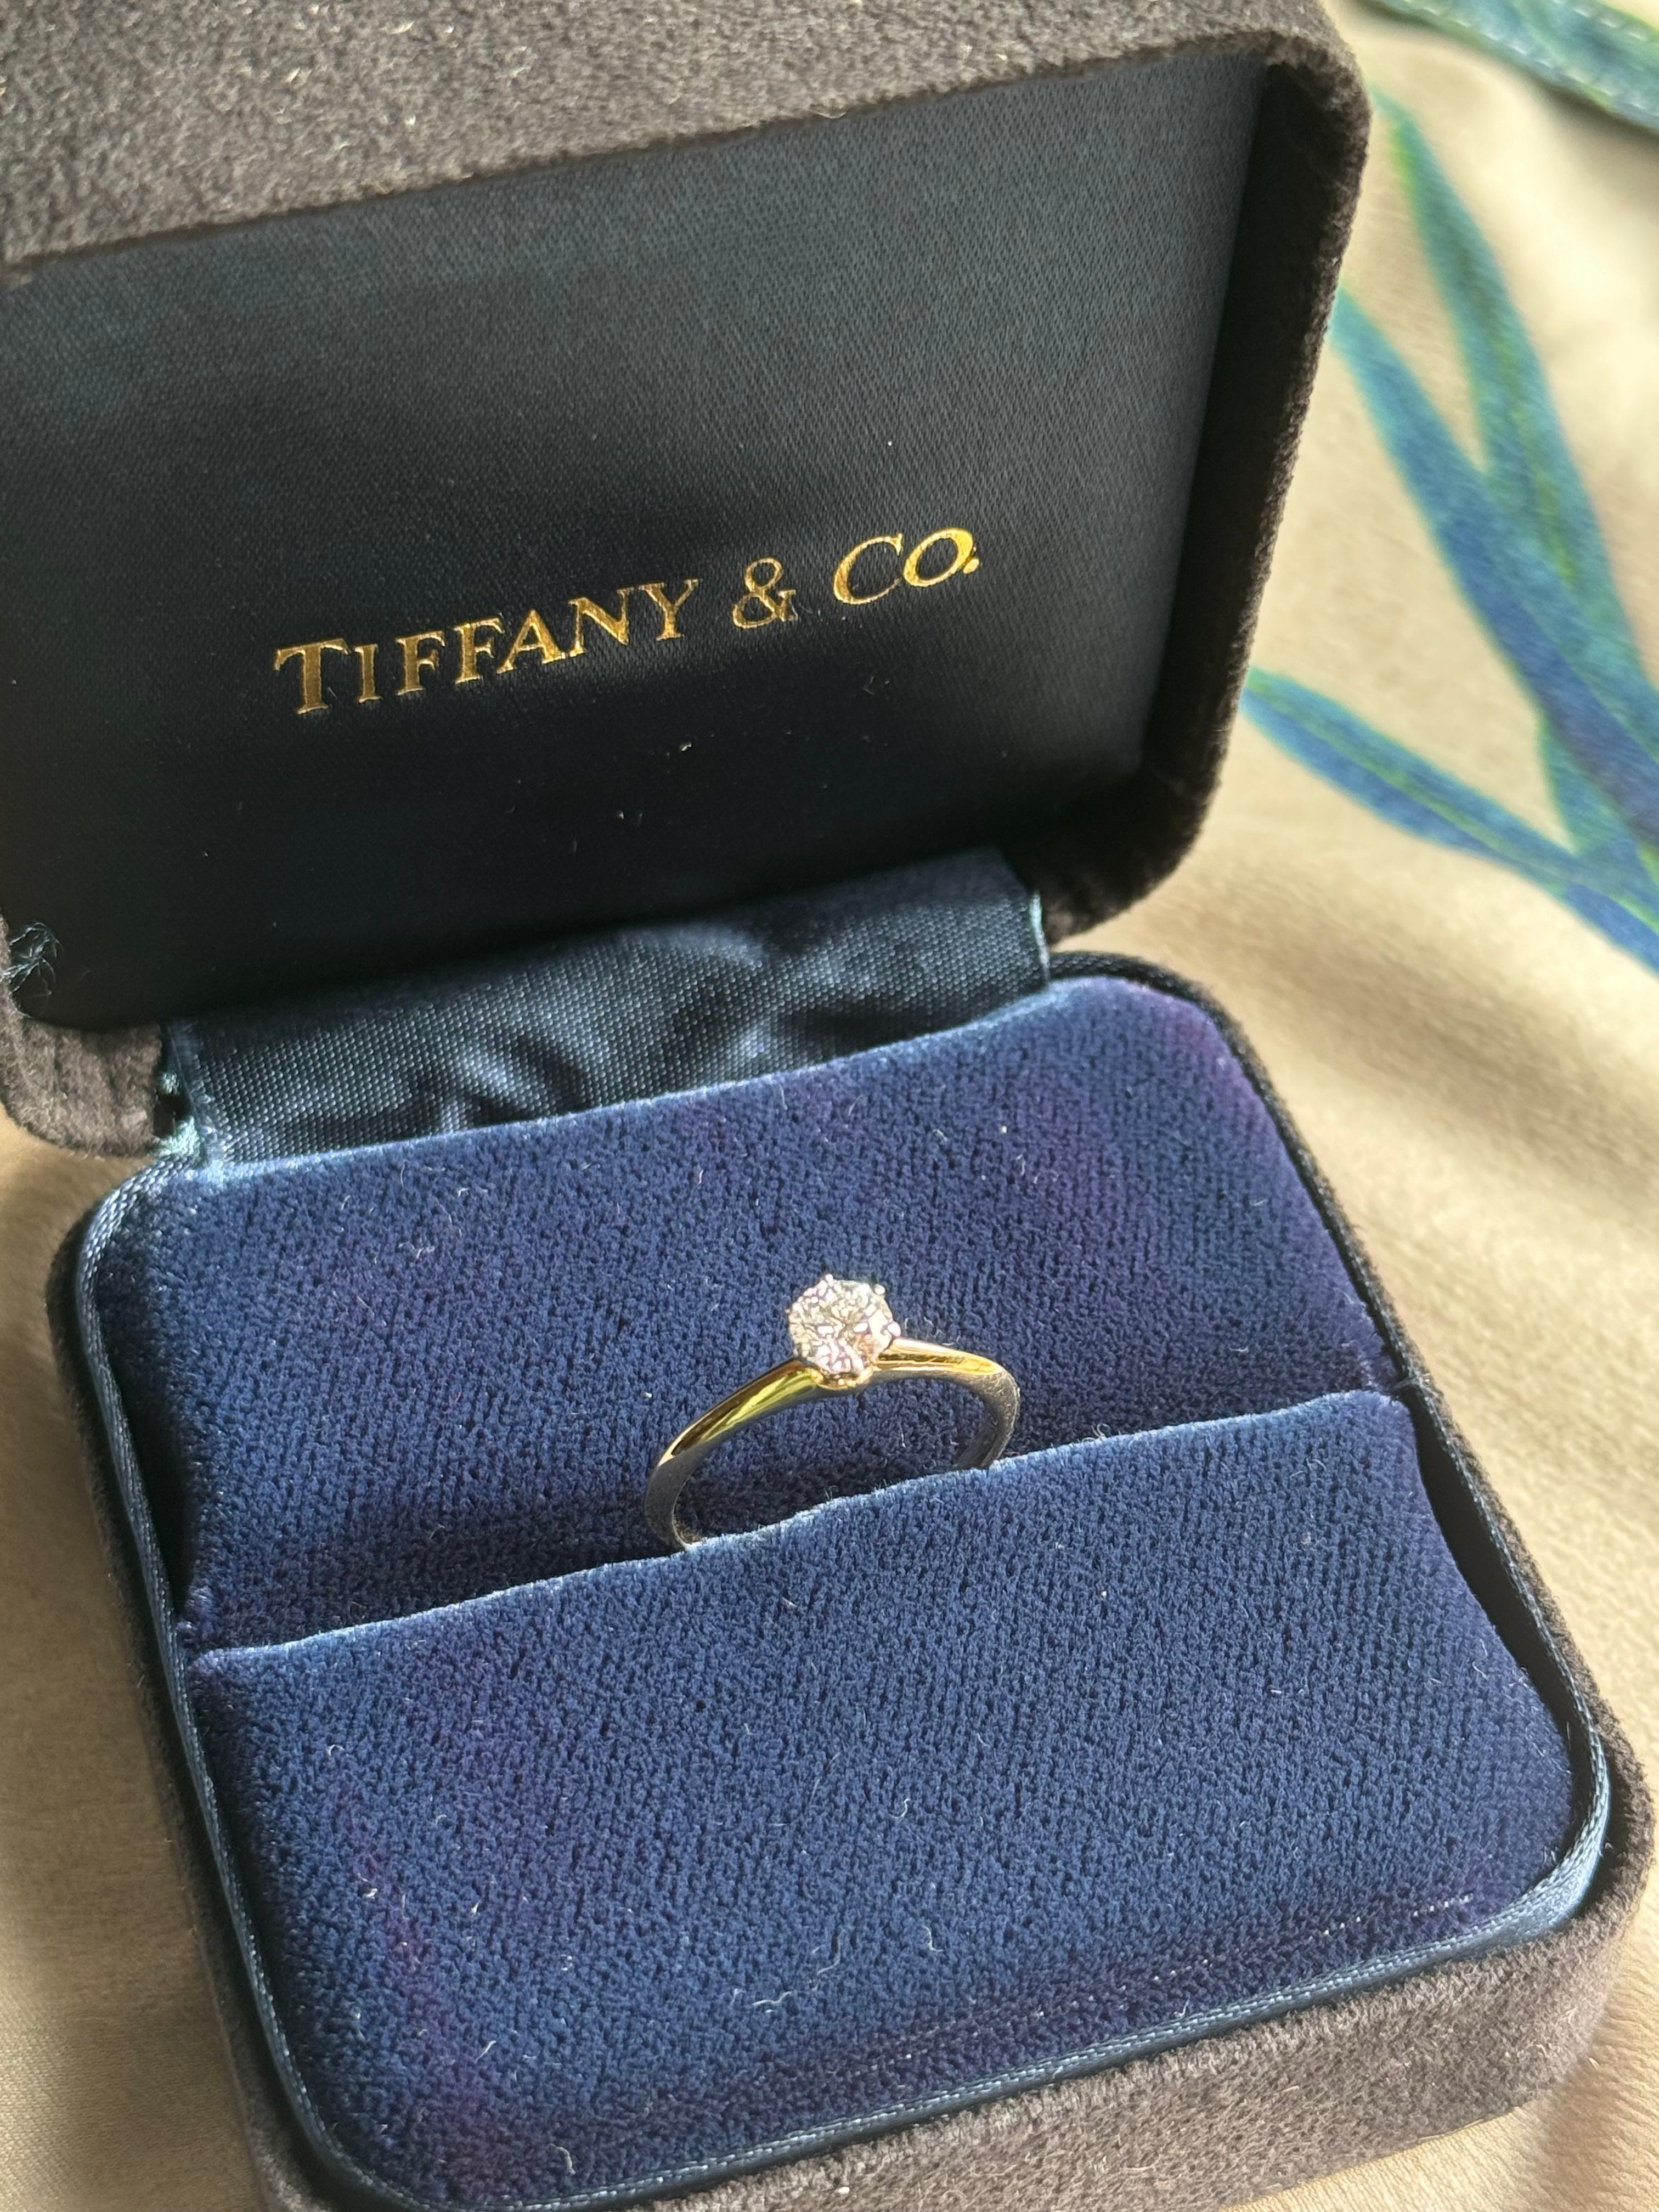 Tiffany & Co. 0.47 carat Diamond Solitaire Ring in 18K Gold For Sale 6